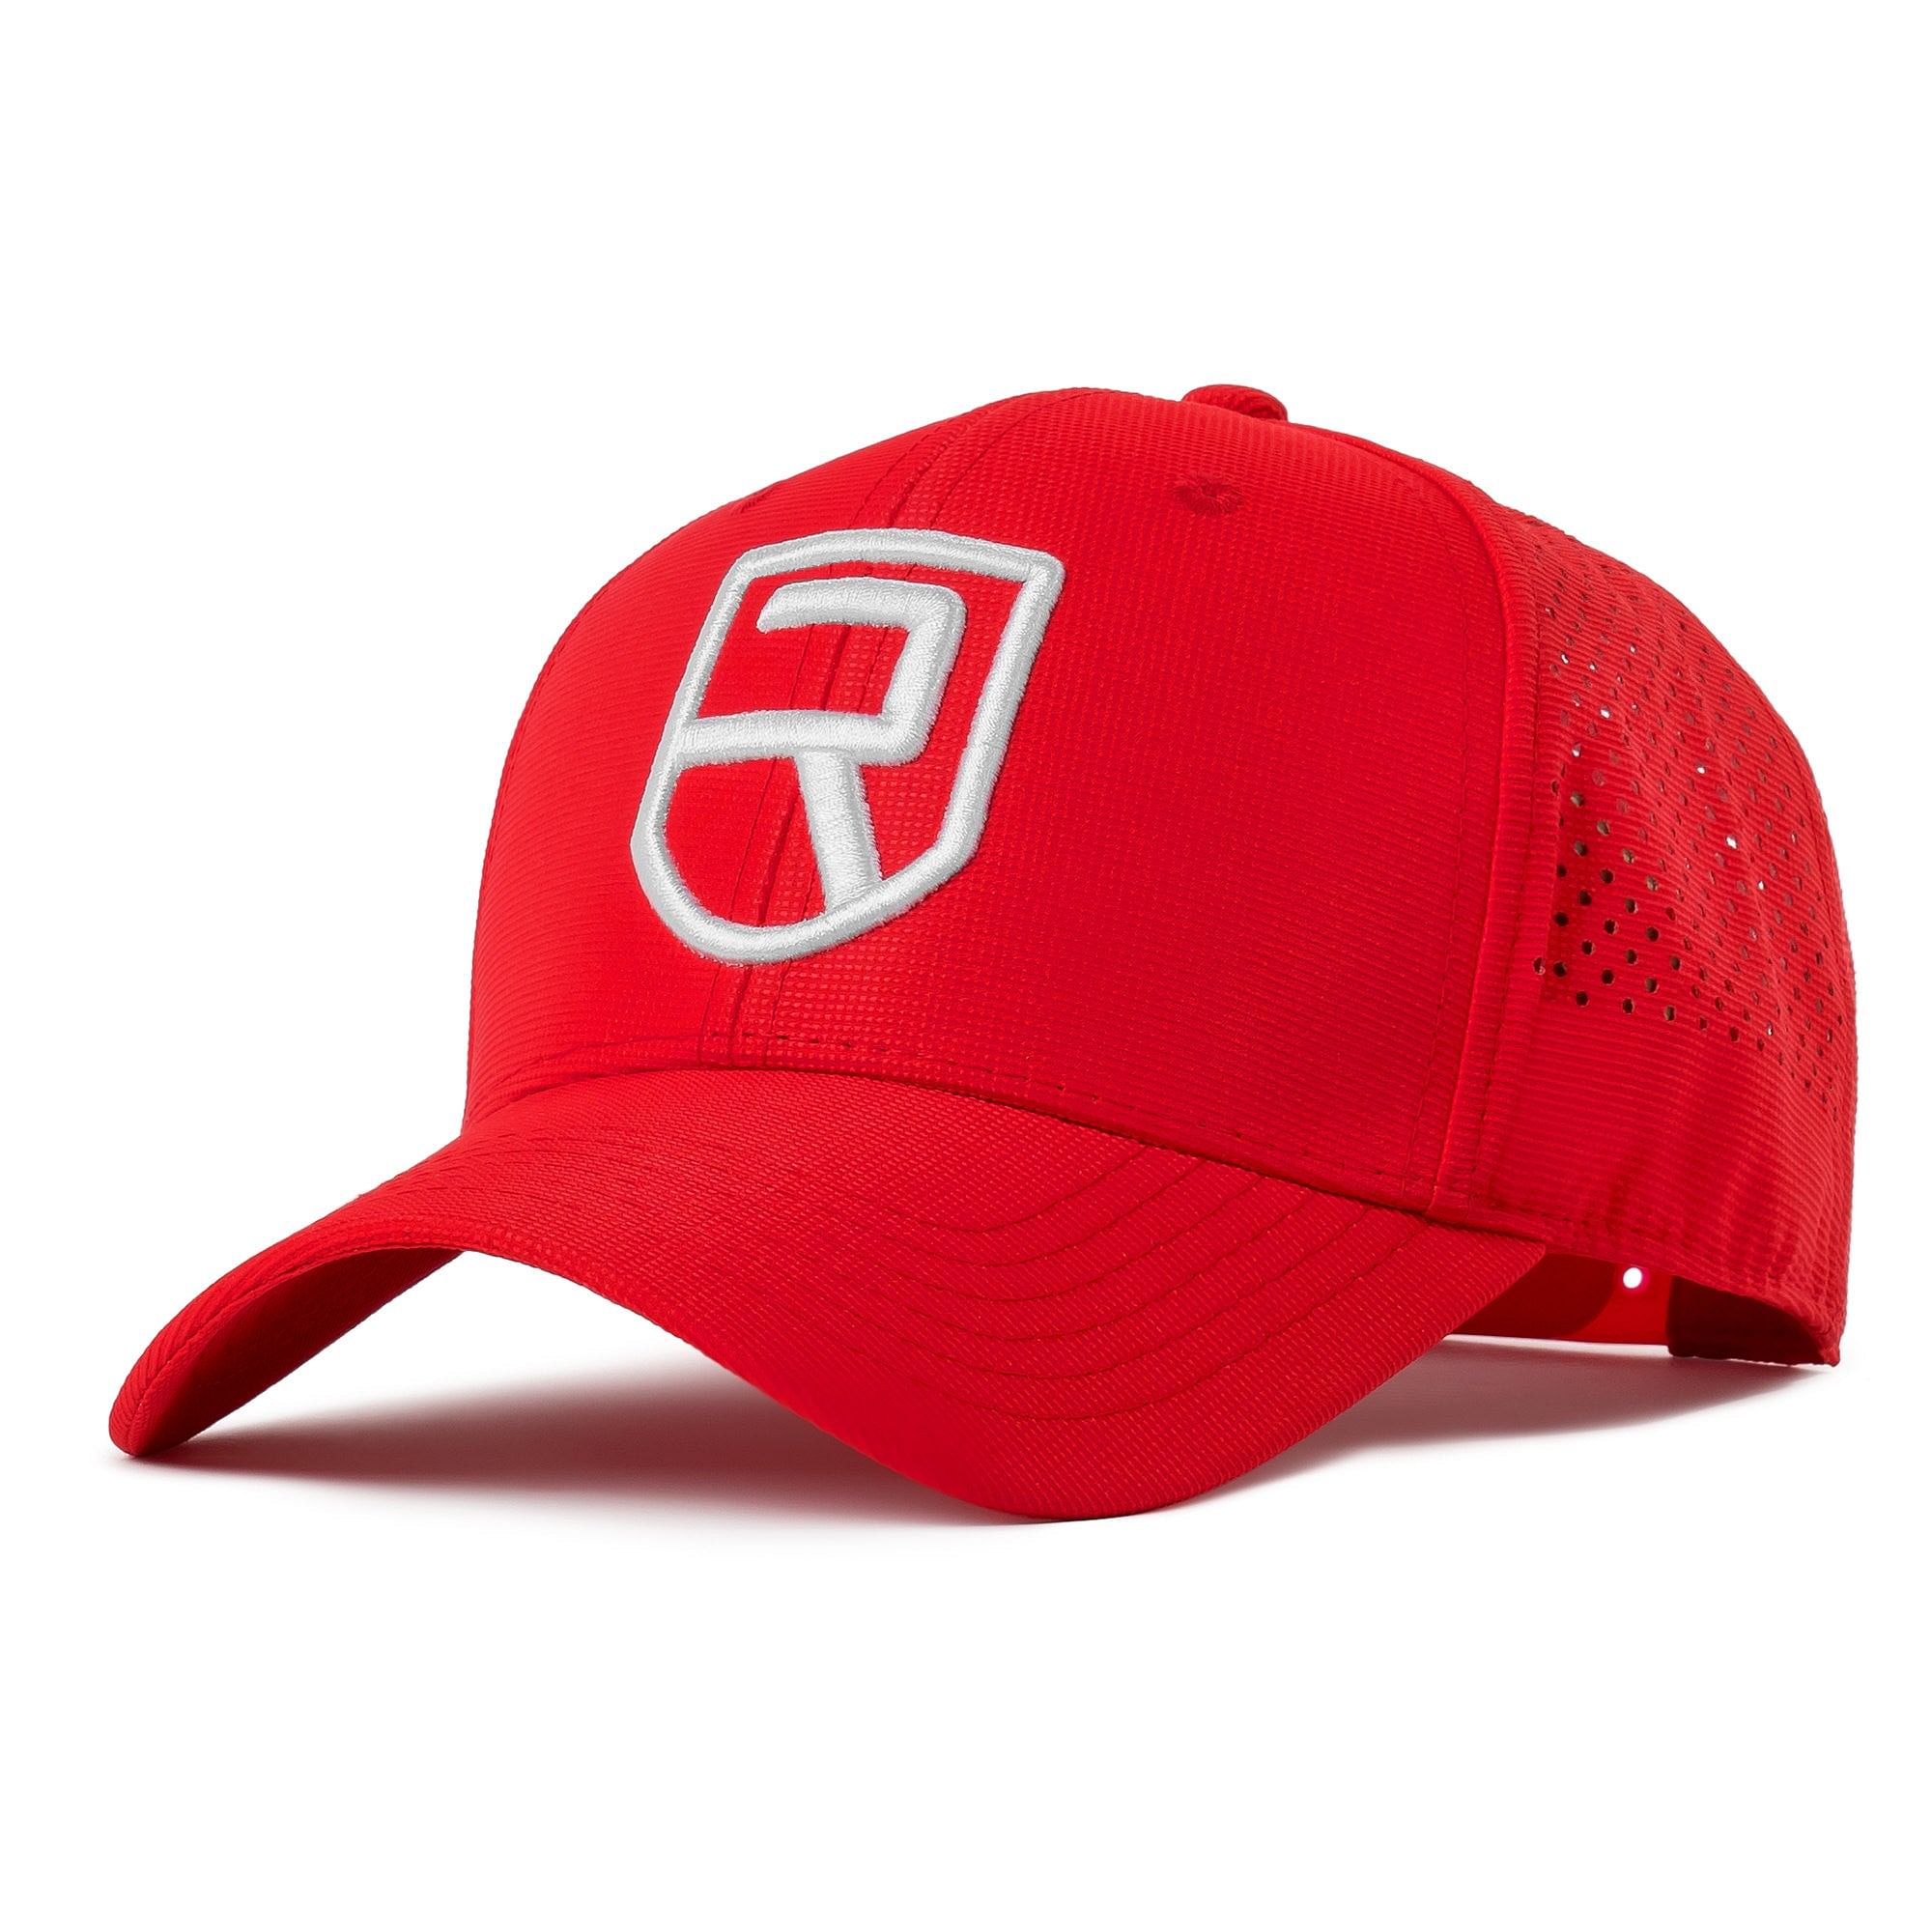 ActiveDry Snapback - Red - Rise